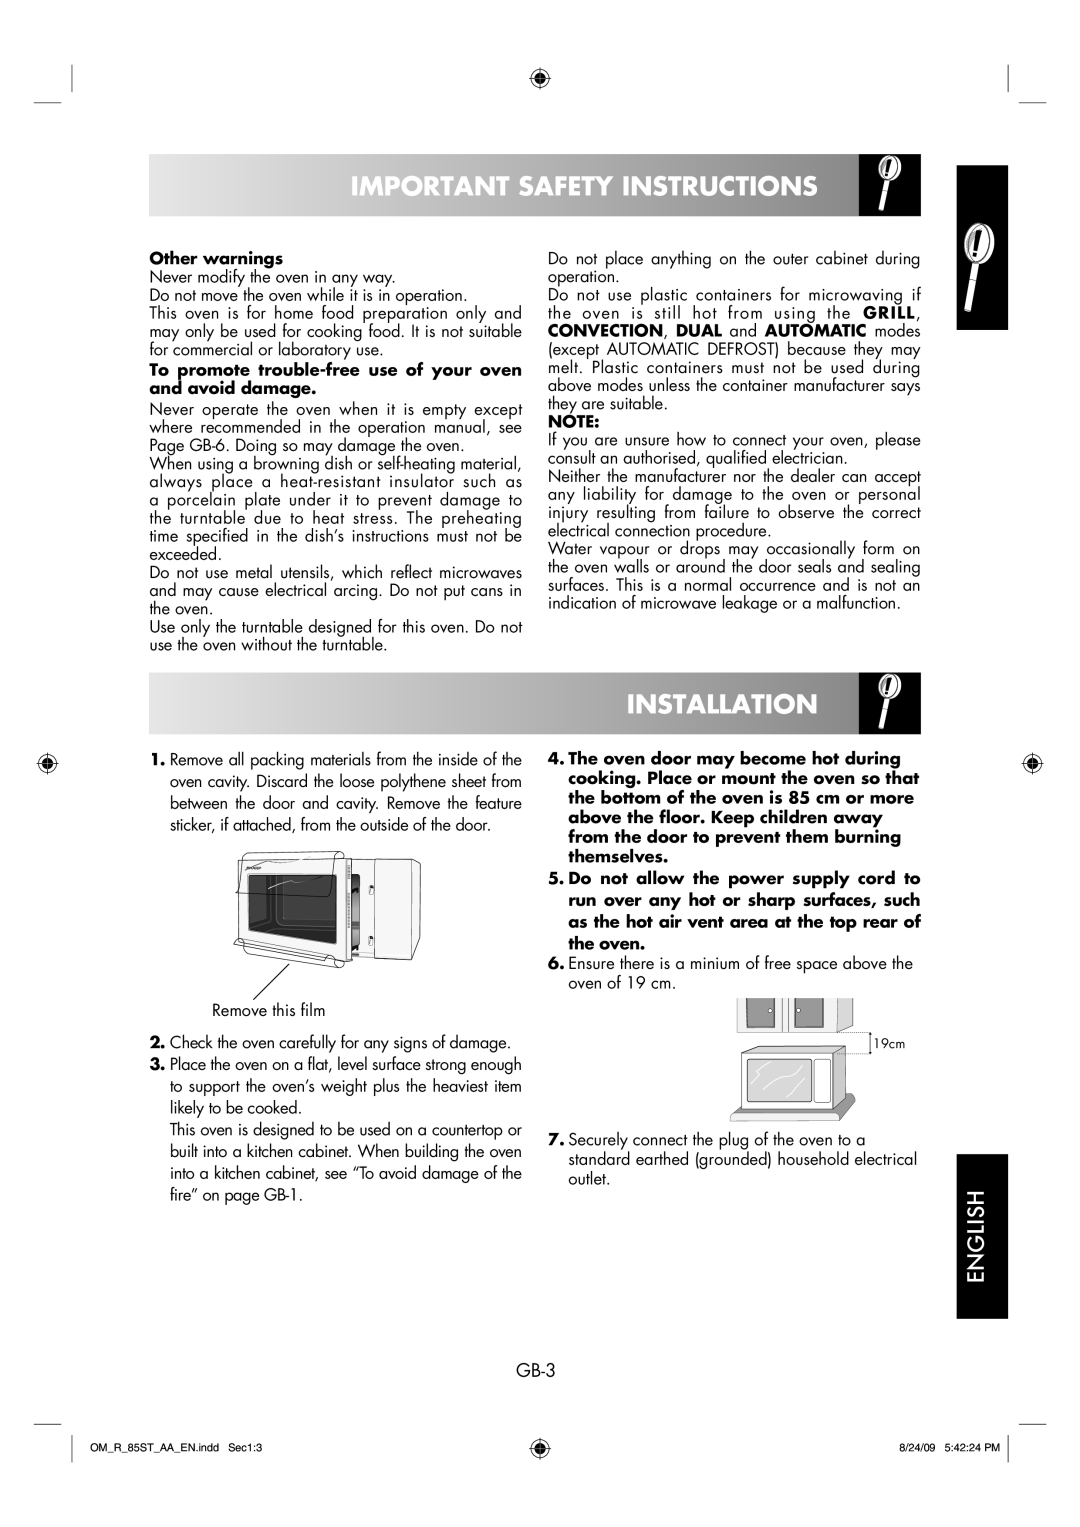 Sharp R-85ST-AA operation manual Installation, Important Safety Instructions, English, GB-3, Other warnings 